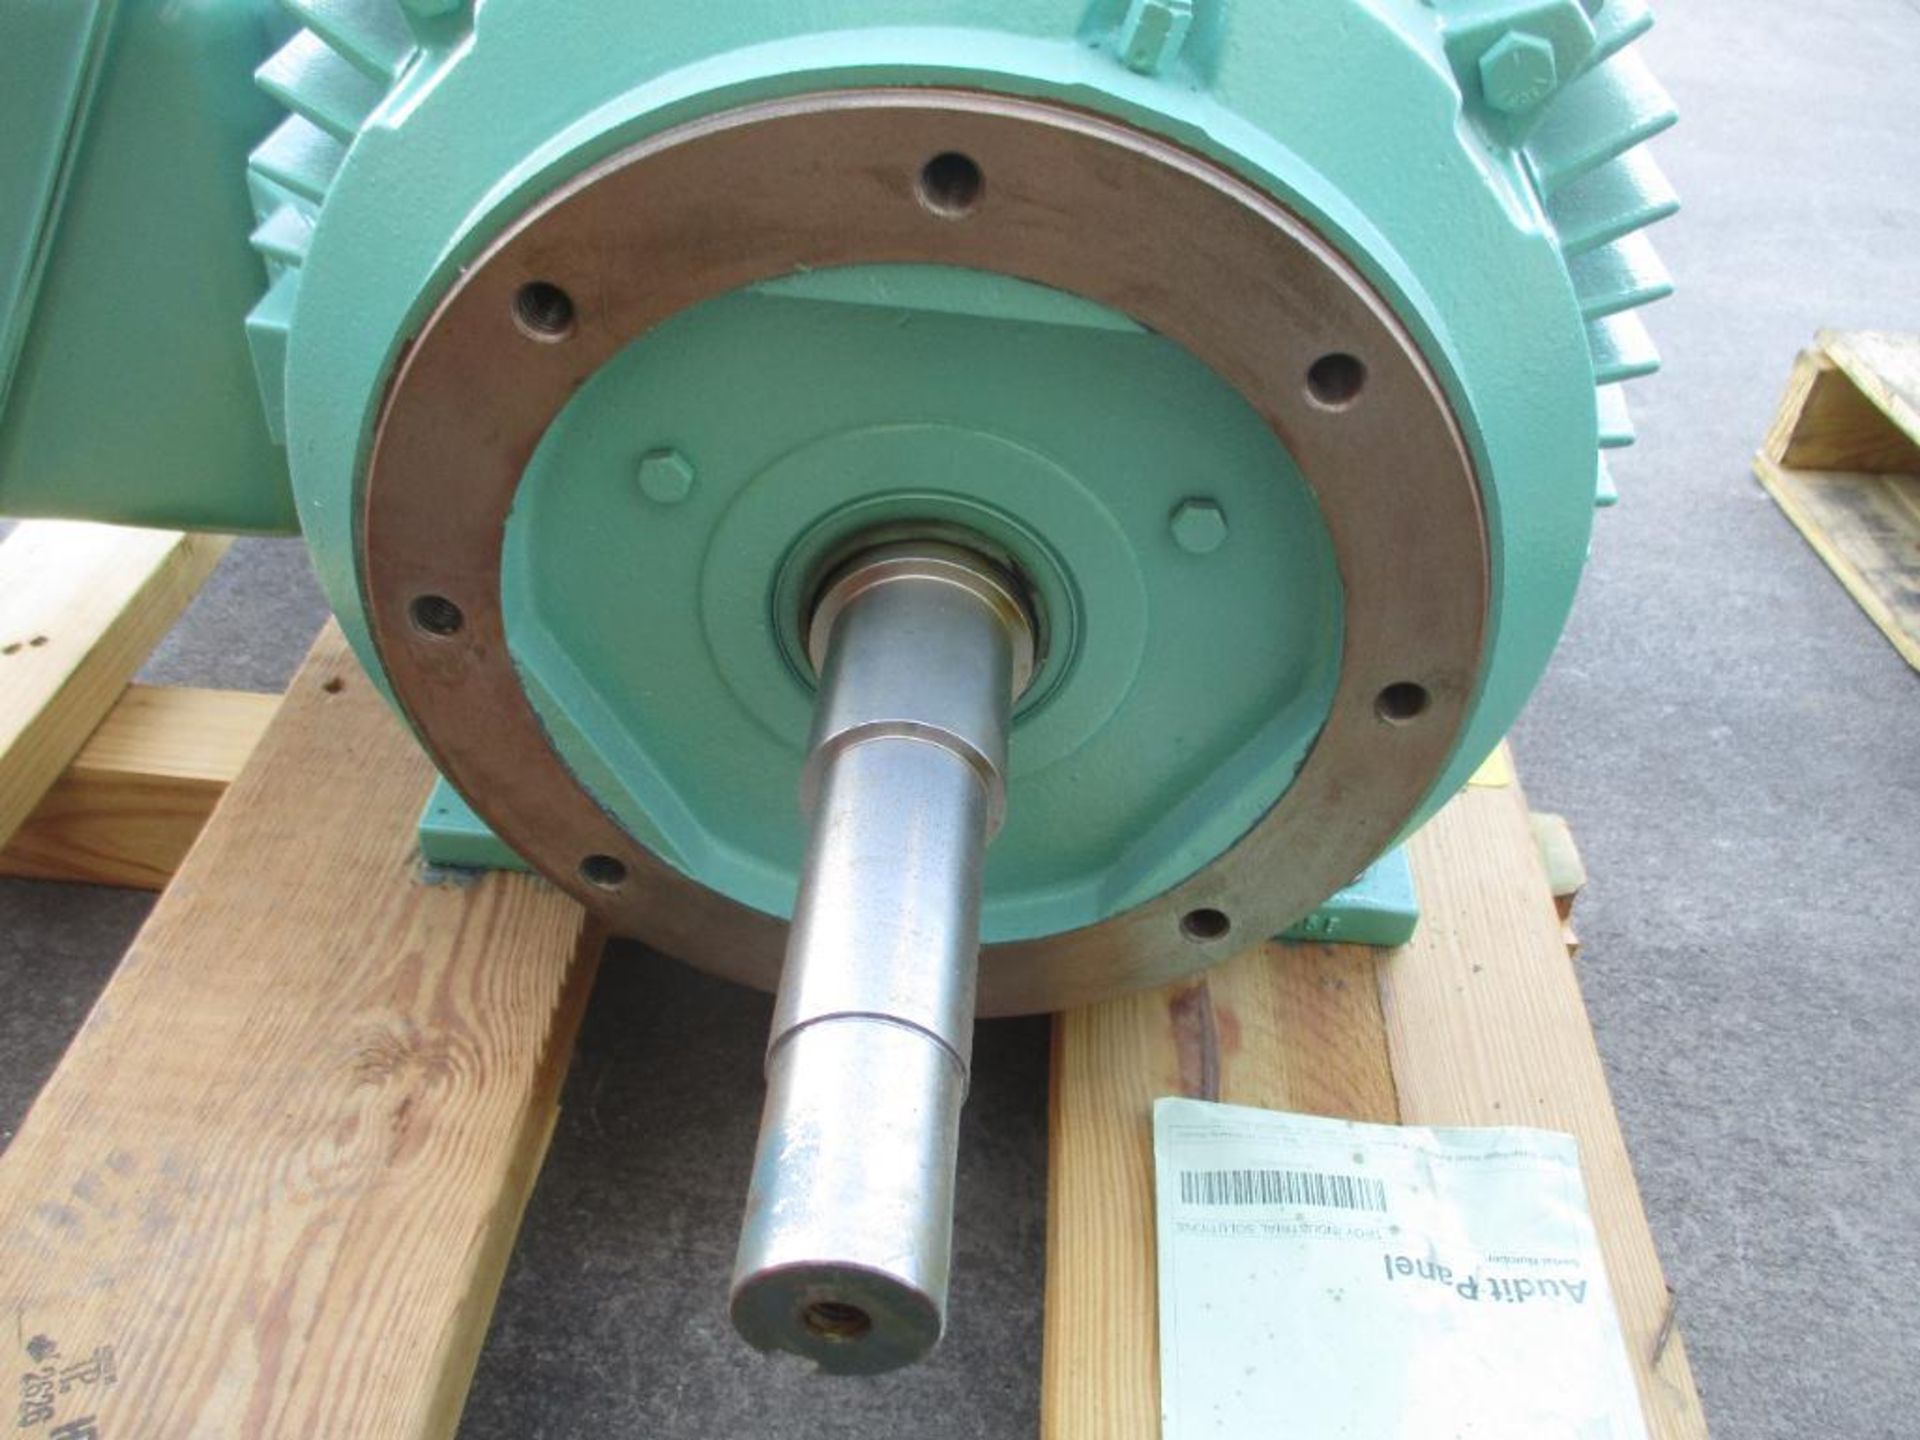 BALDOR-RELIANCE SUPER-E MOTOR A36-5299-1513 75HP 1780RPM FRAME 365JP 3 PHASE ELECTRIC MOTOR 985# LBS - Image 5 of 5